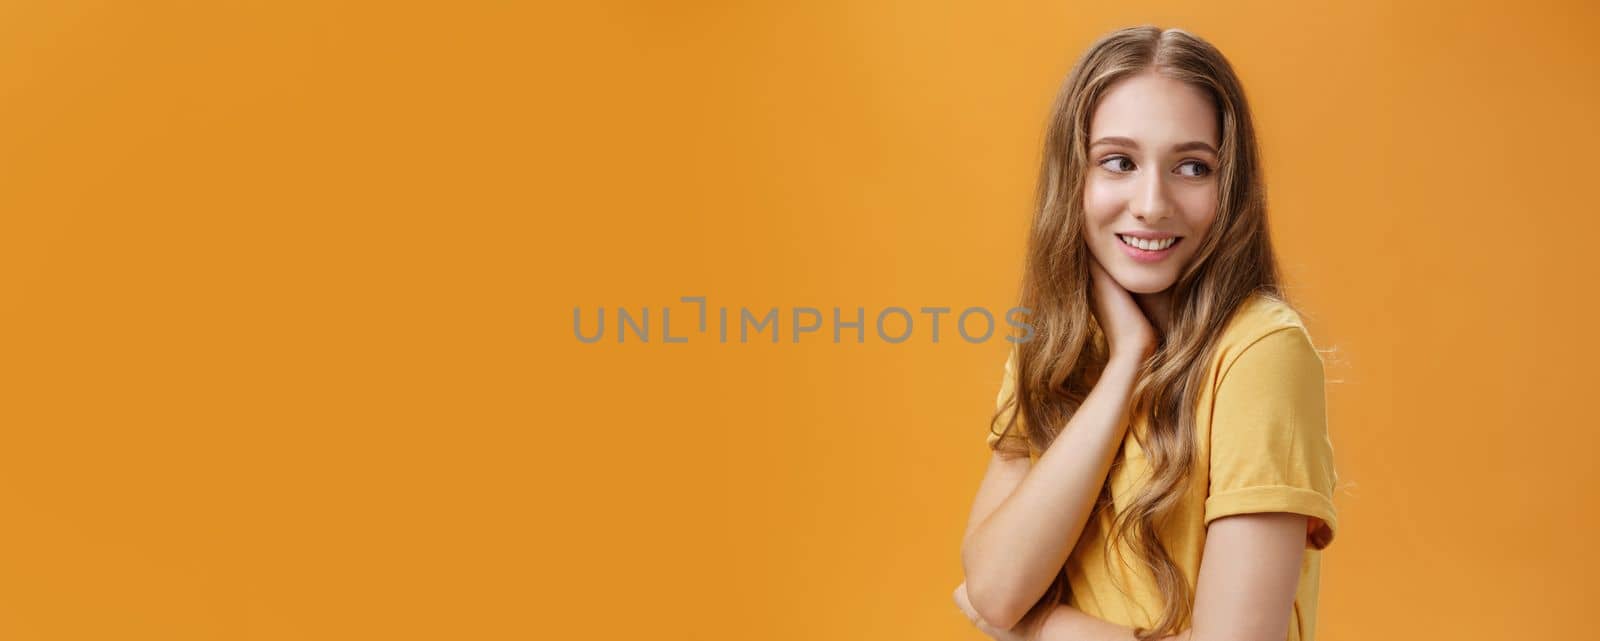 Lifestyle. Soft and tender beautiful young girl with wavy fair hair turning back and look right touching neck gently smiling silly and sincere feeling pretty and self-assured posing over orange background.